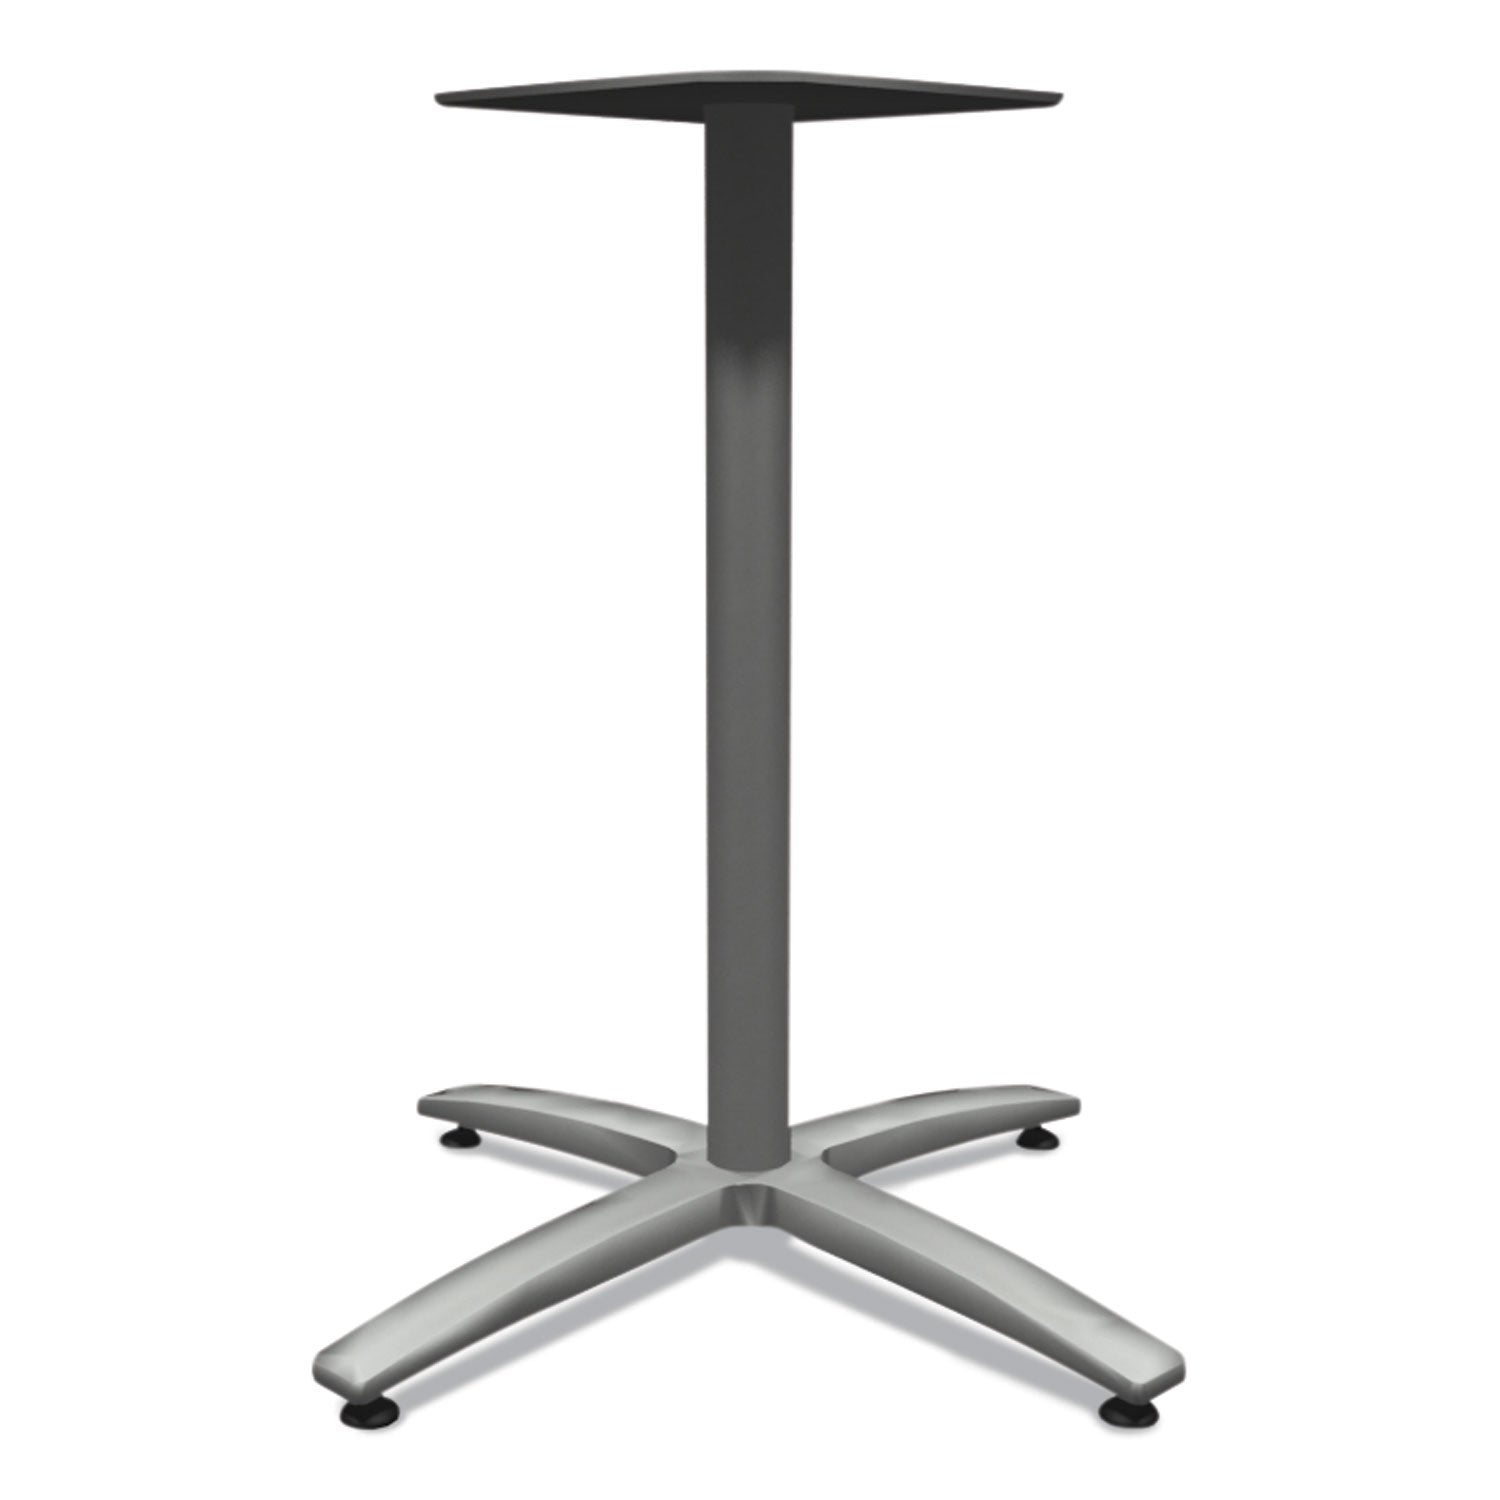 between-seated-height-x-base-for-30-to-36-table-tops-2618w-x-2957h-silver_honbtx30spr8 - 2